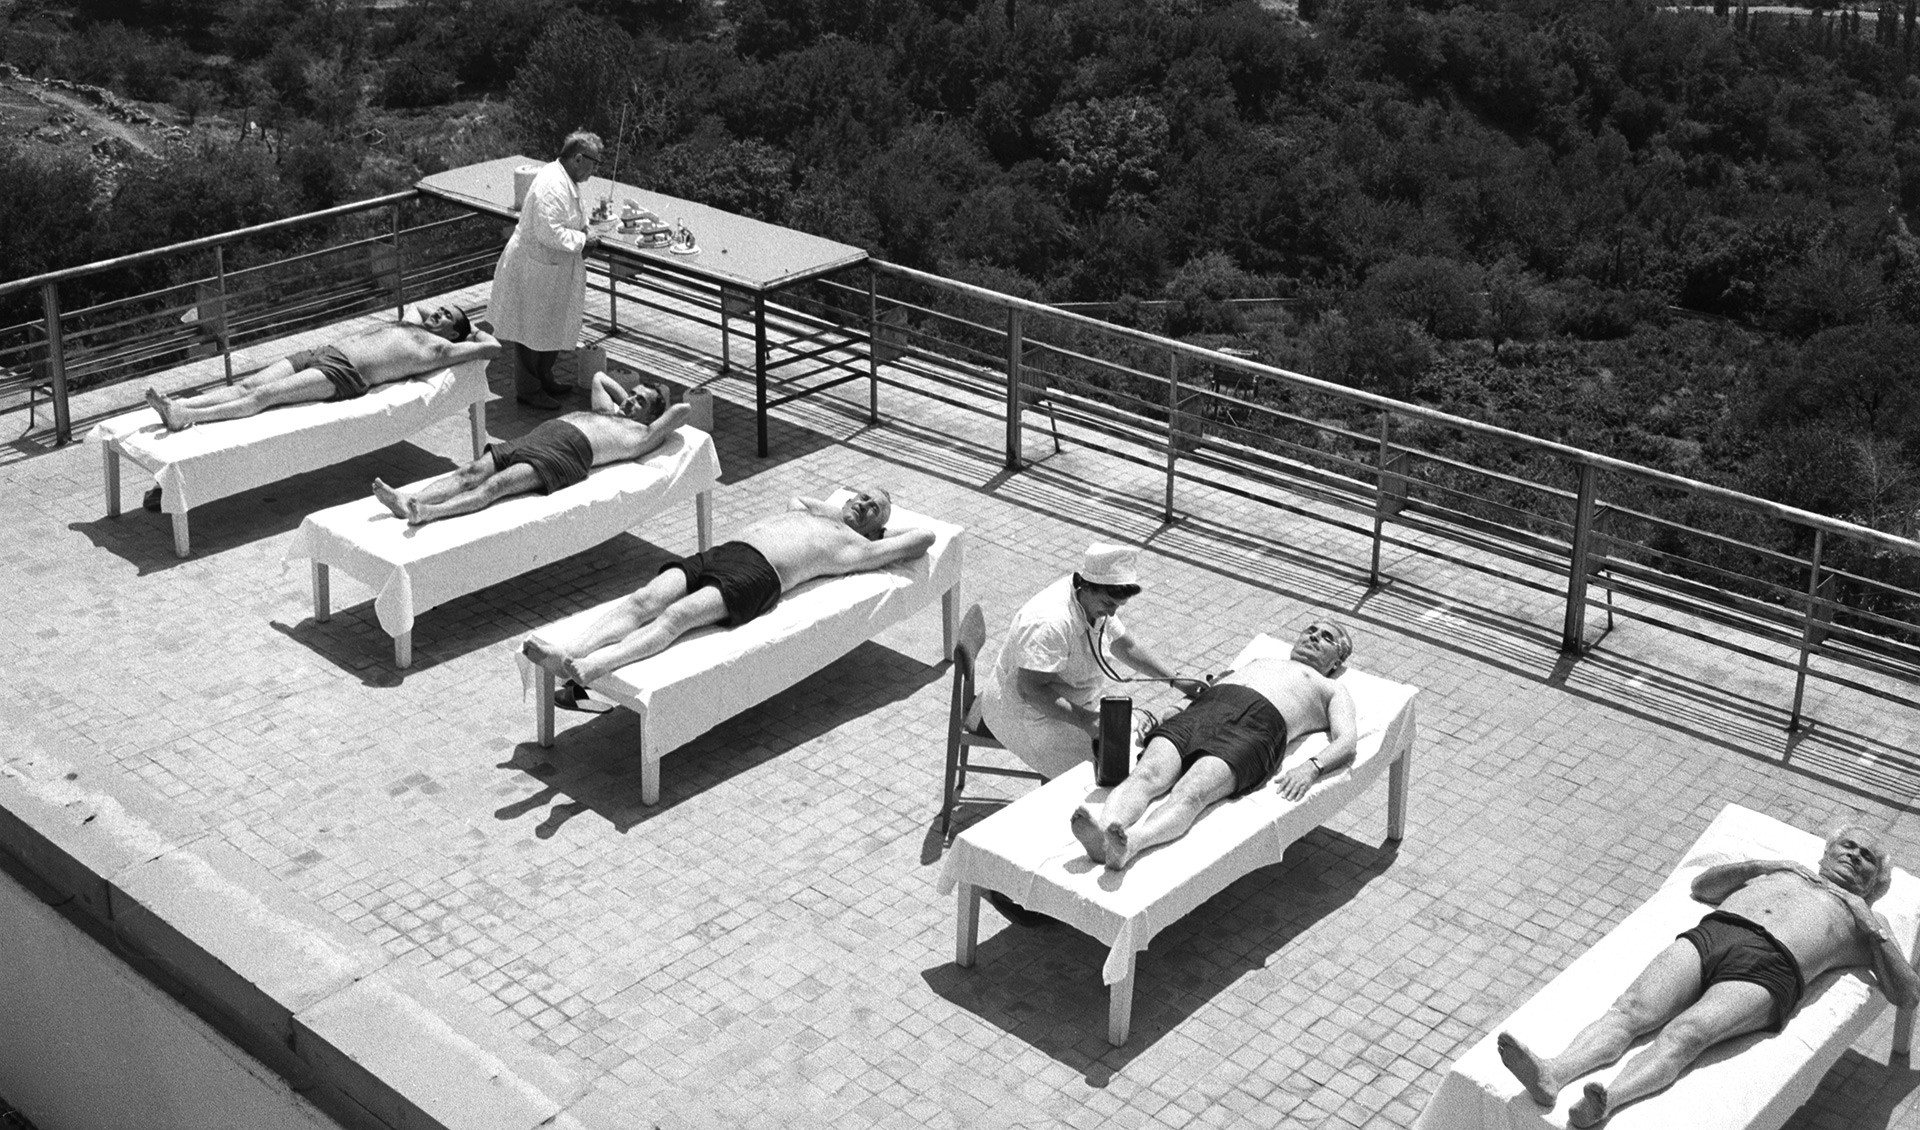 Sanatorium patients go for a well-earned sunbathing session.